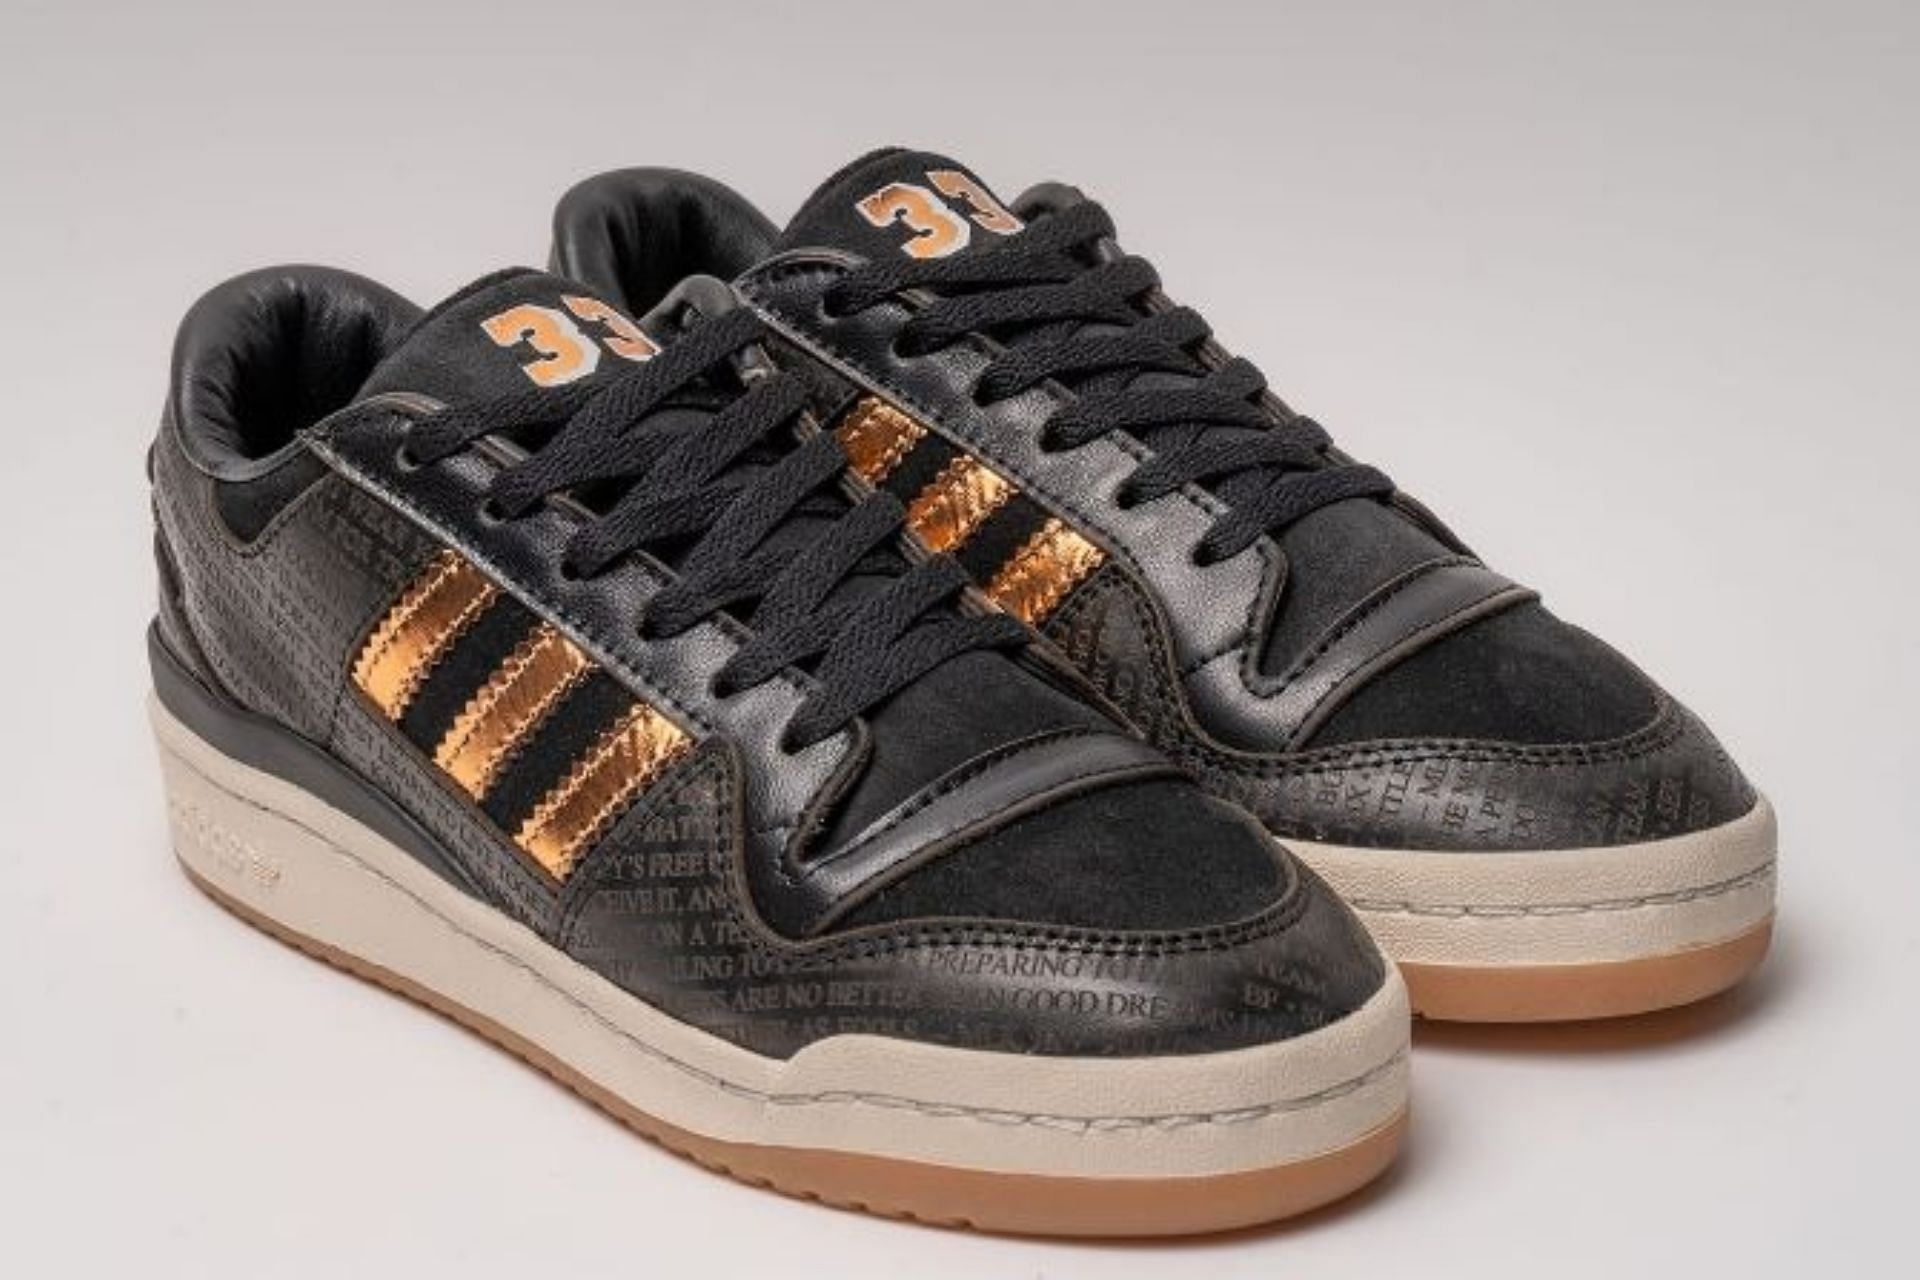 Adidas x Kareem Abdul-Jabbar &quot;Evolution of Excellence&quot; Sneaker Collection (Image via Adidas)